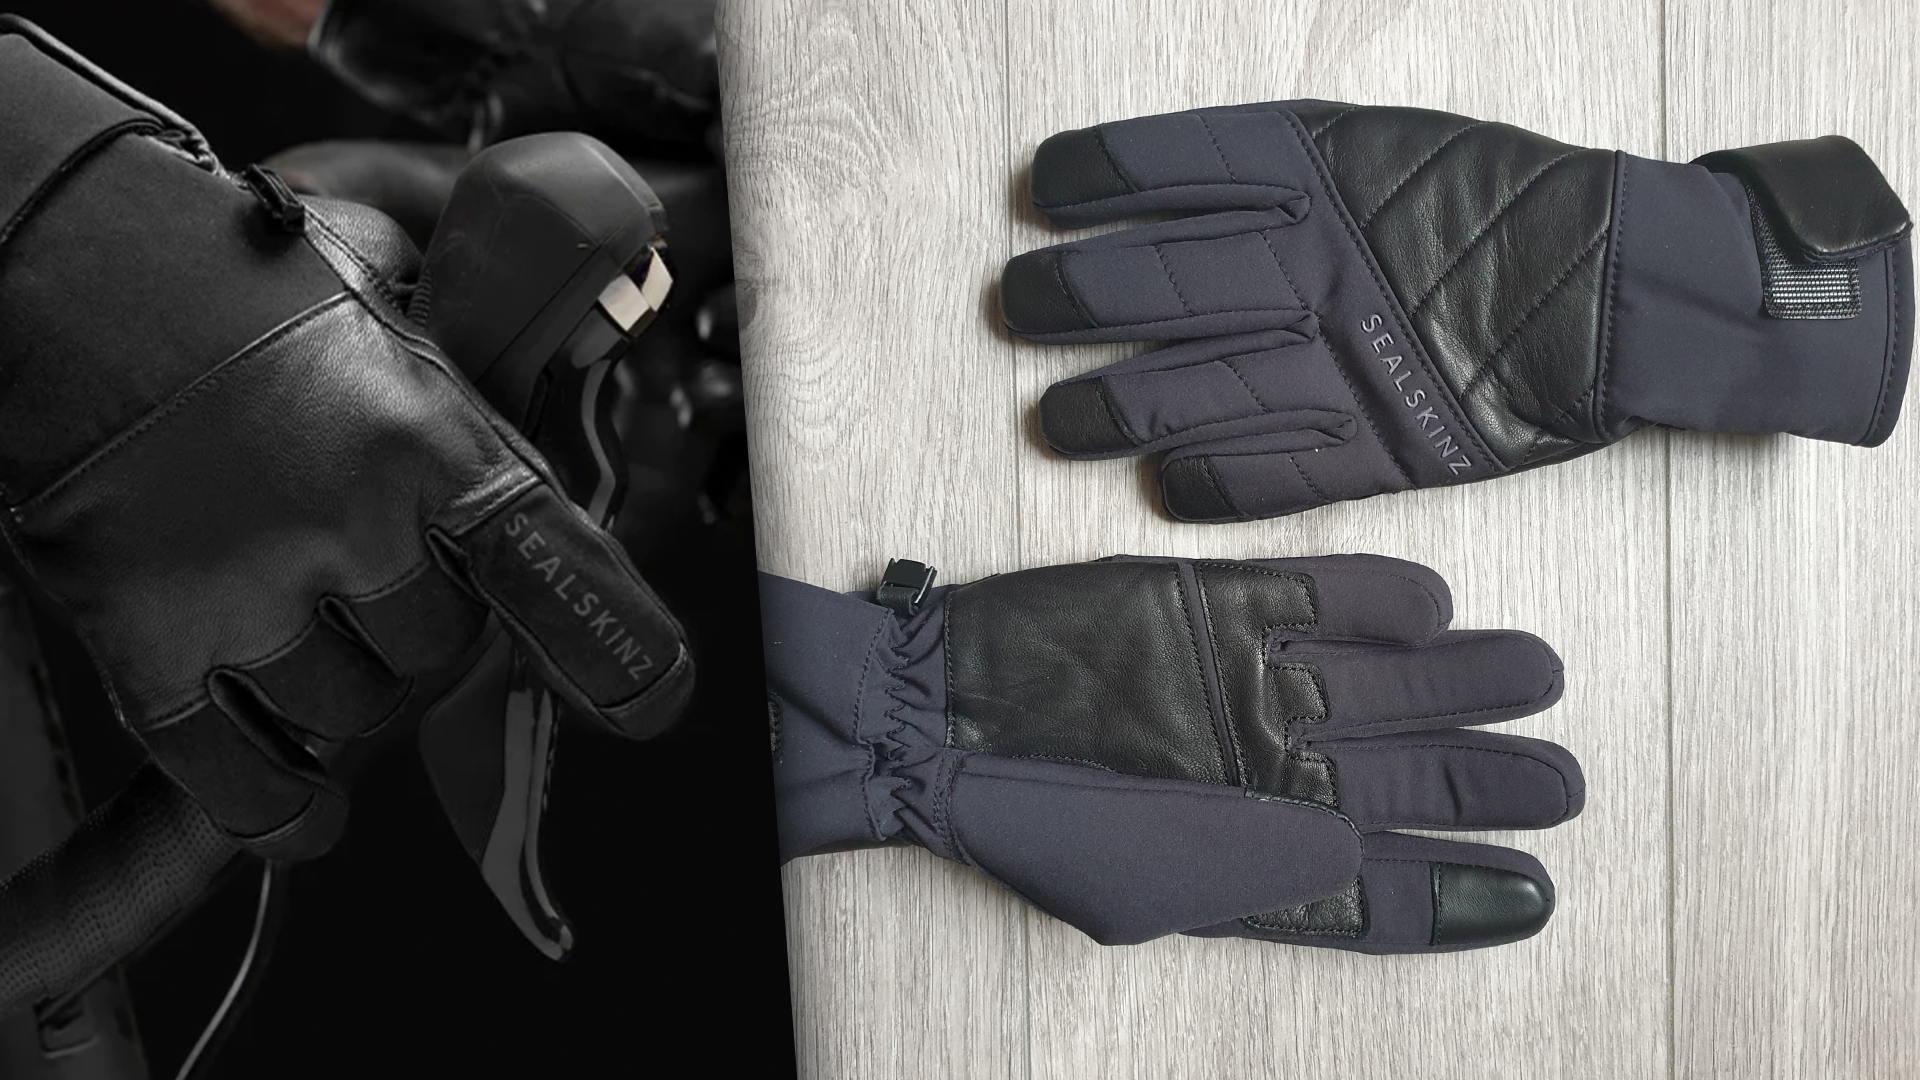 Best Winter Gloves: Sealskinz Extreme Cold Weather Insulated Glove with Fusion Control